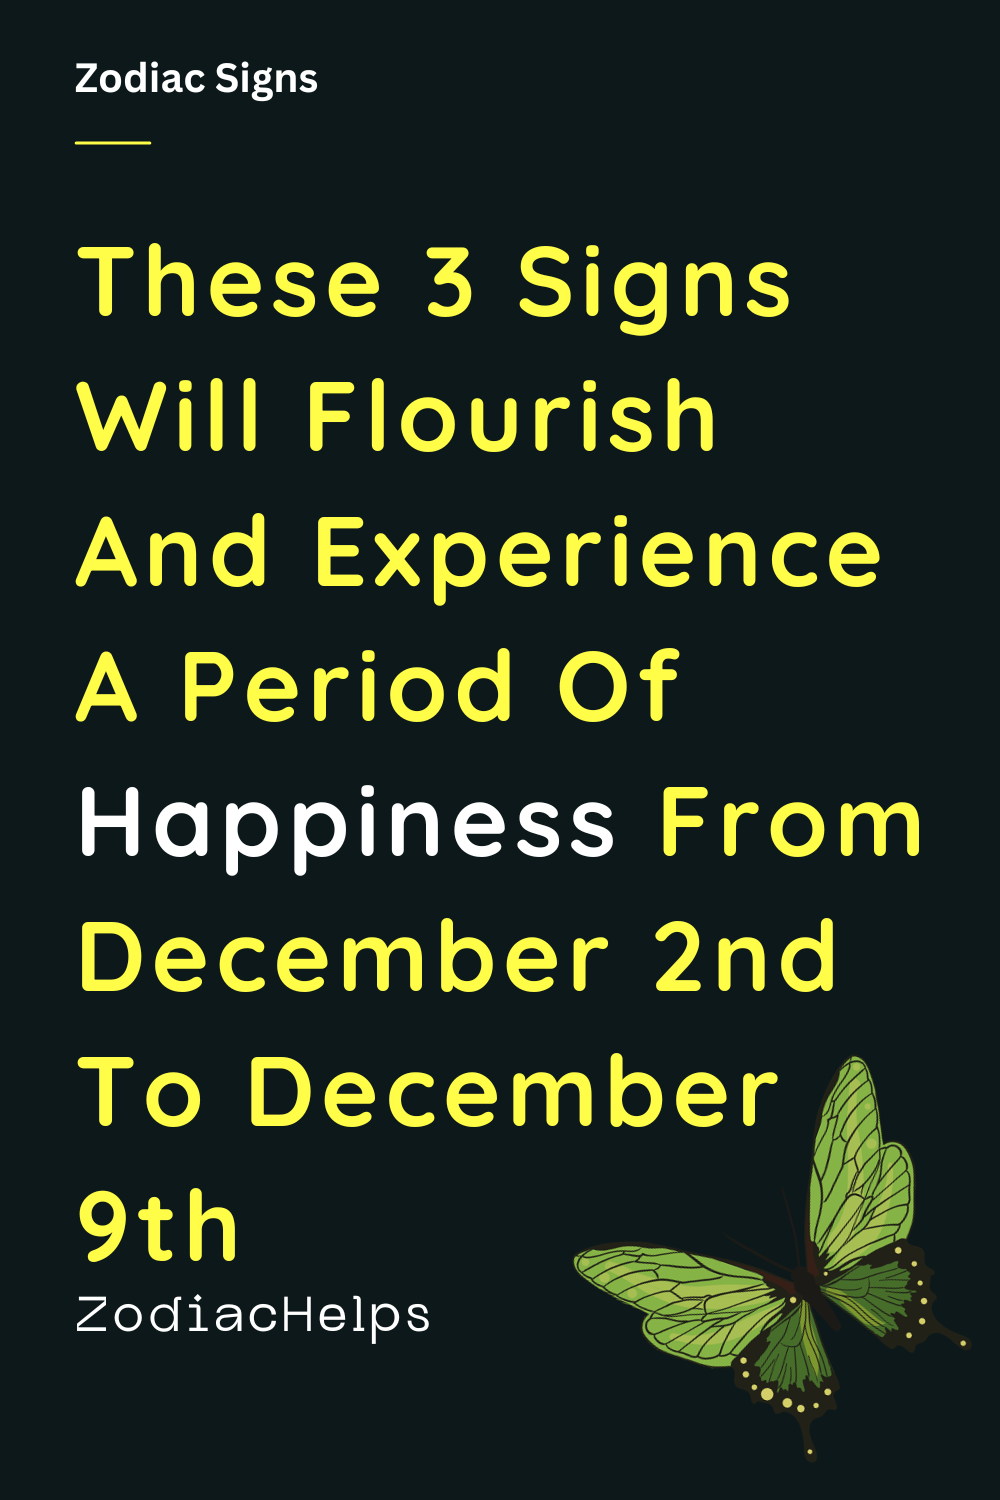 These 3 Signs Will Flourish And Experience A Period Of Happiness From December 2nd To December 9th